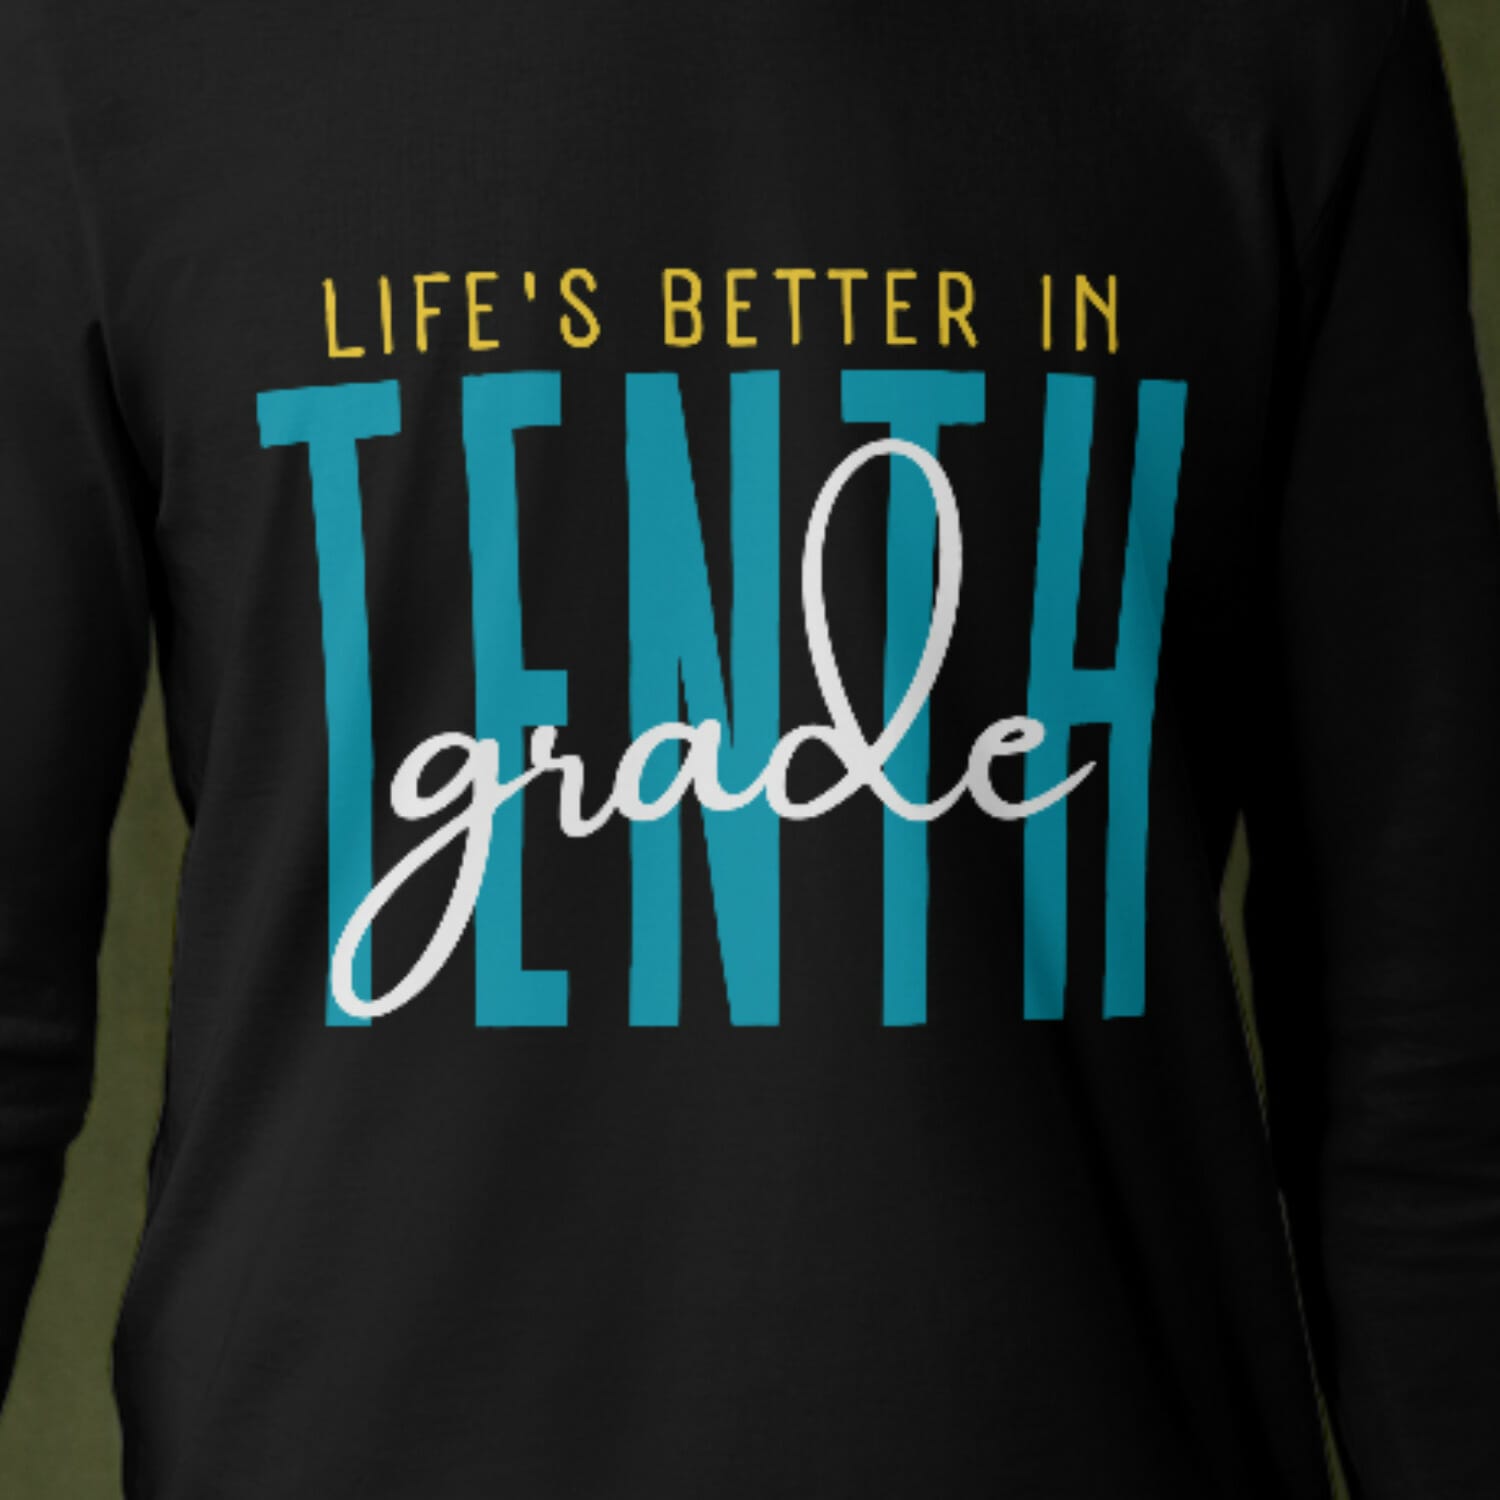 Life Is Better In Tenth Grade Tshirt Design